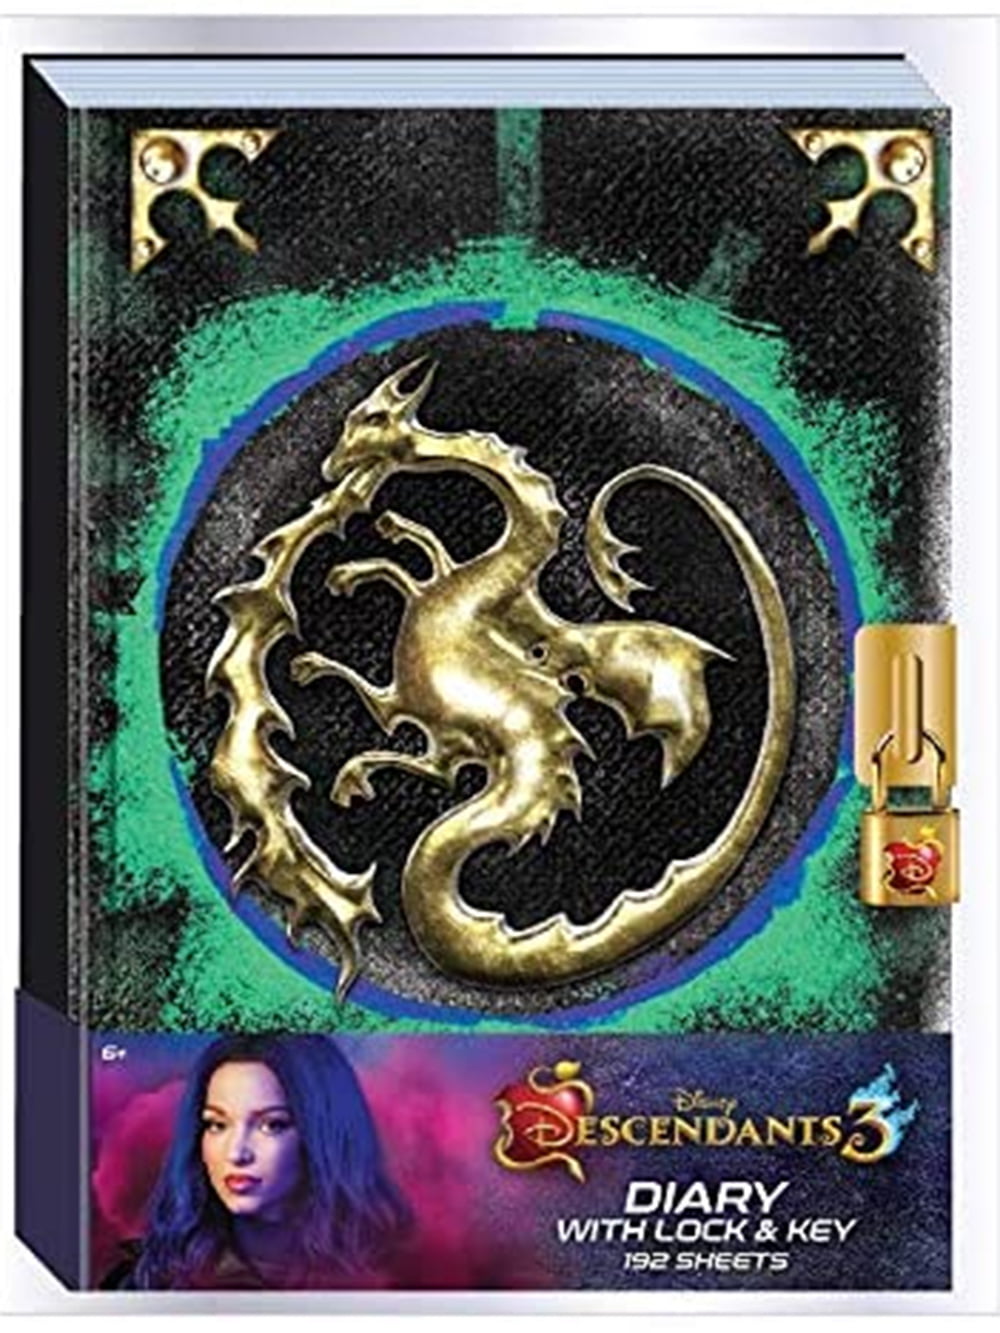 Descendants 3 Cool-Lock and Key Diary